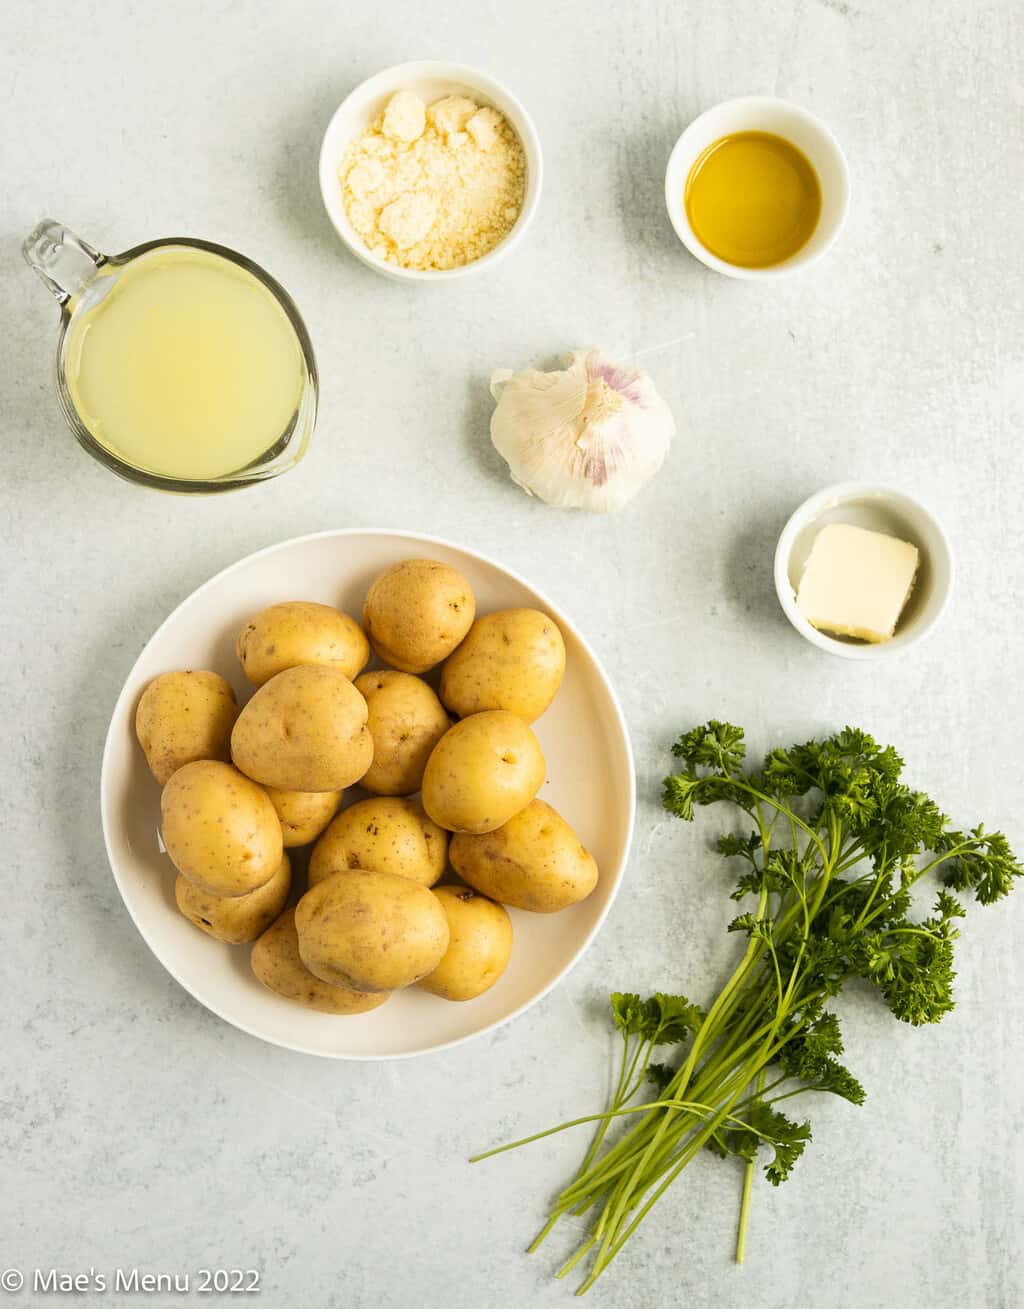 All of the ingredients of Instant Pot baby potatoes.